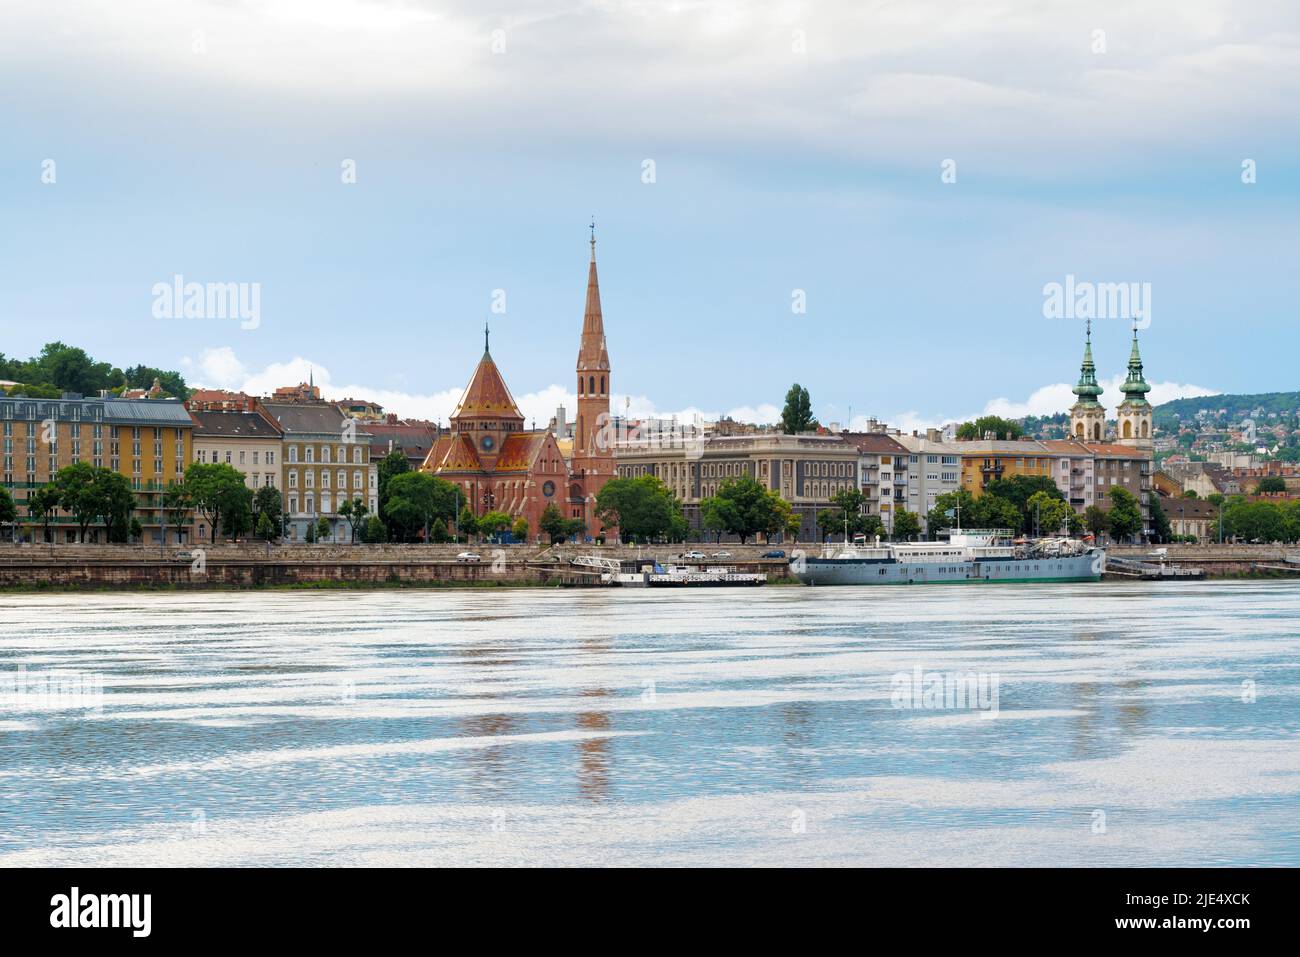 Budapest old city. Buda side view across the river featuring Szilágyi Dezső Square Reformed Church Stock Photo